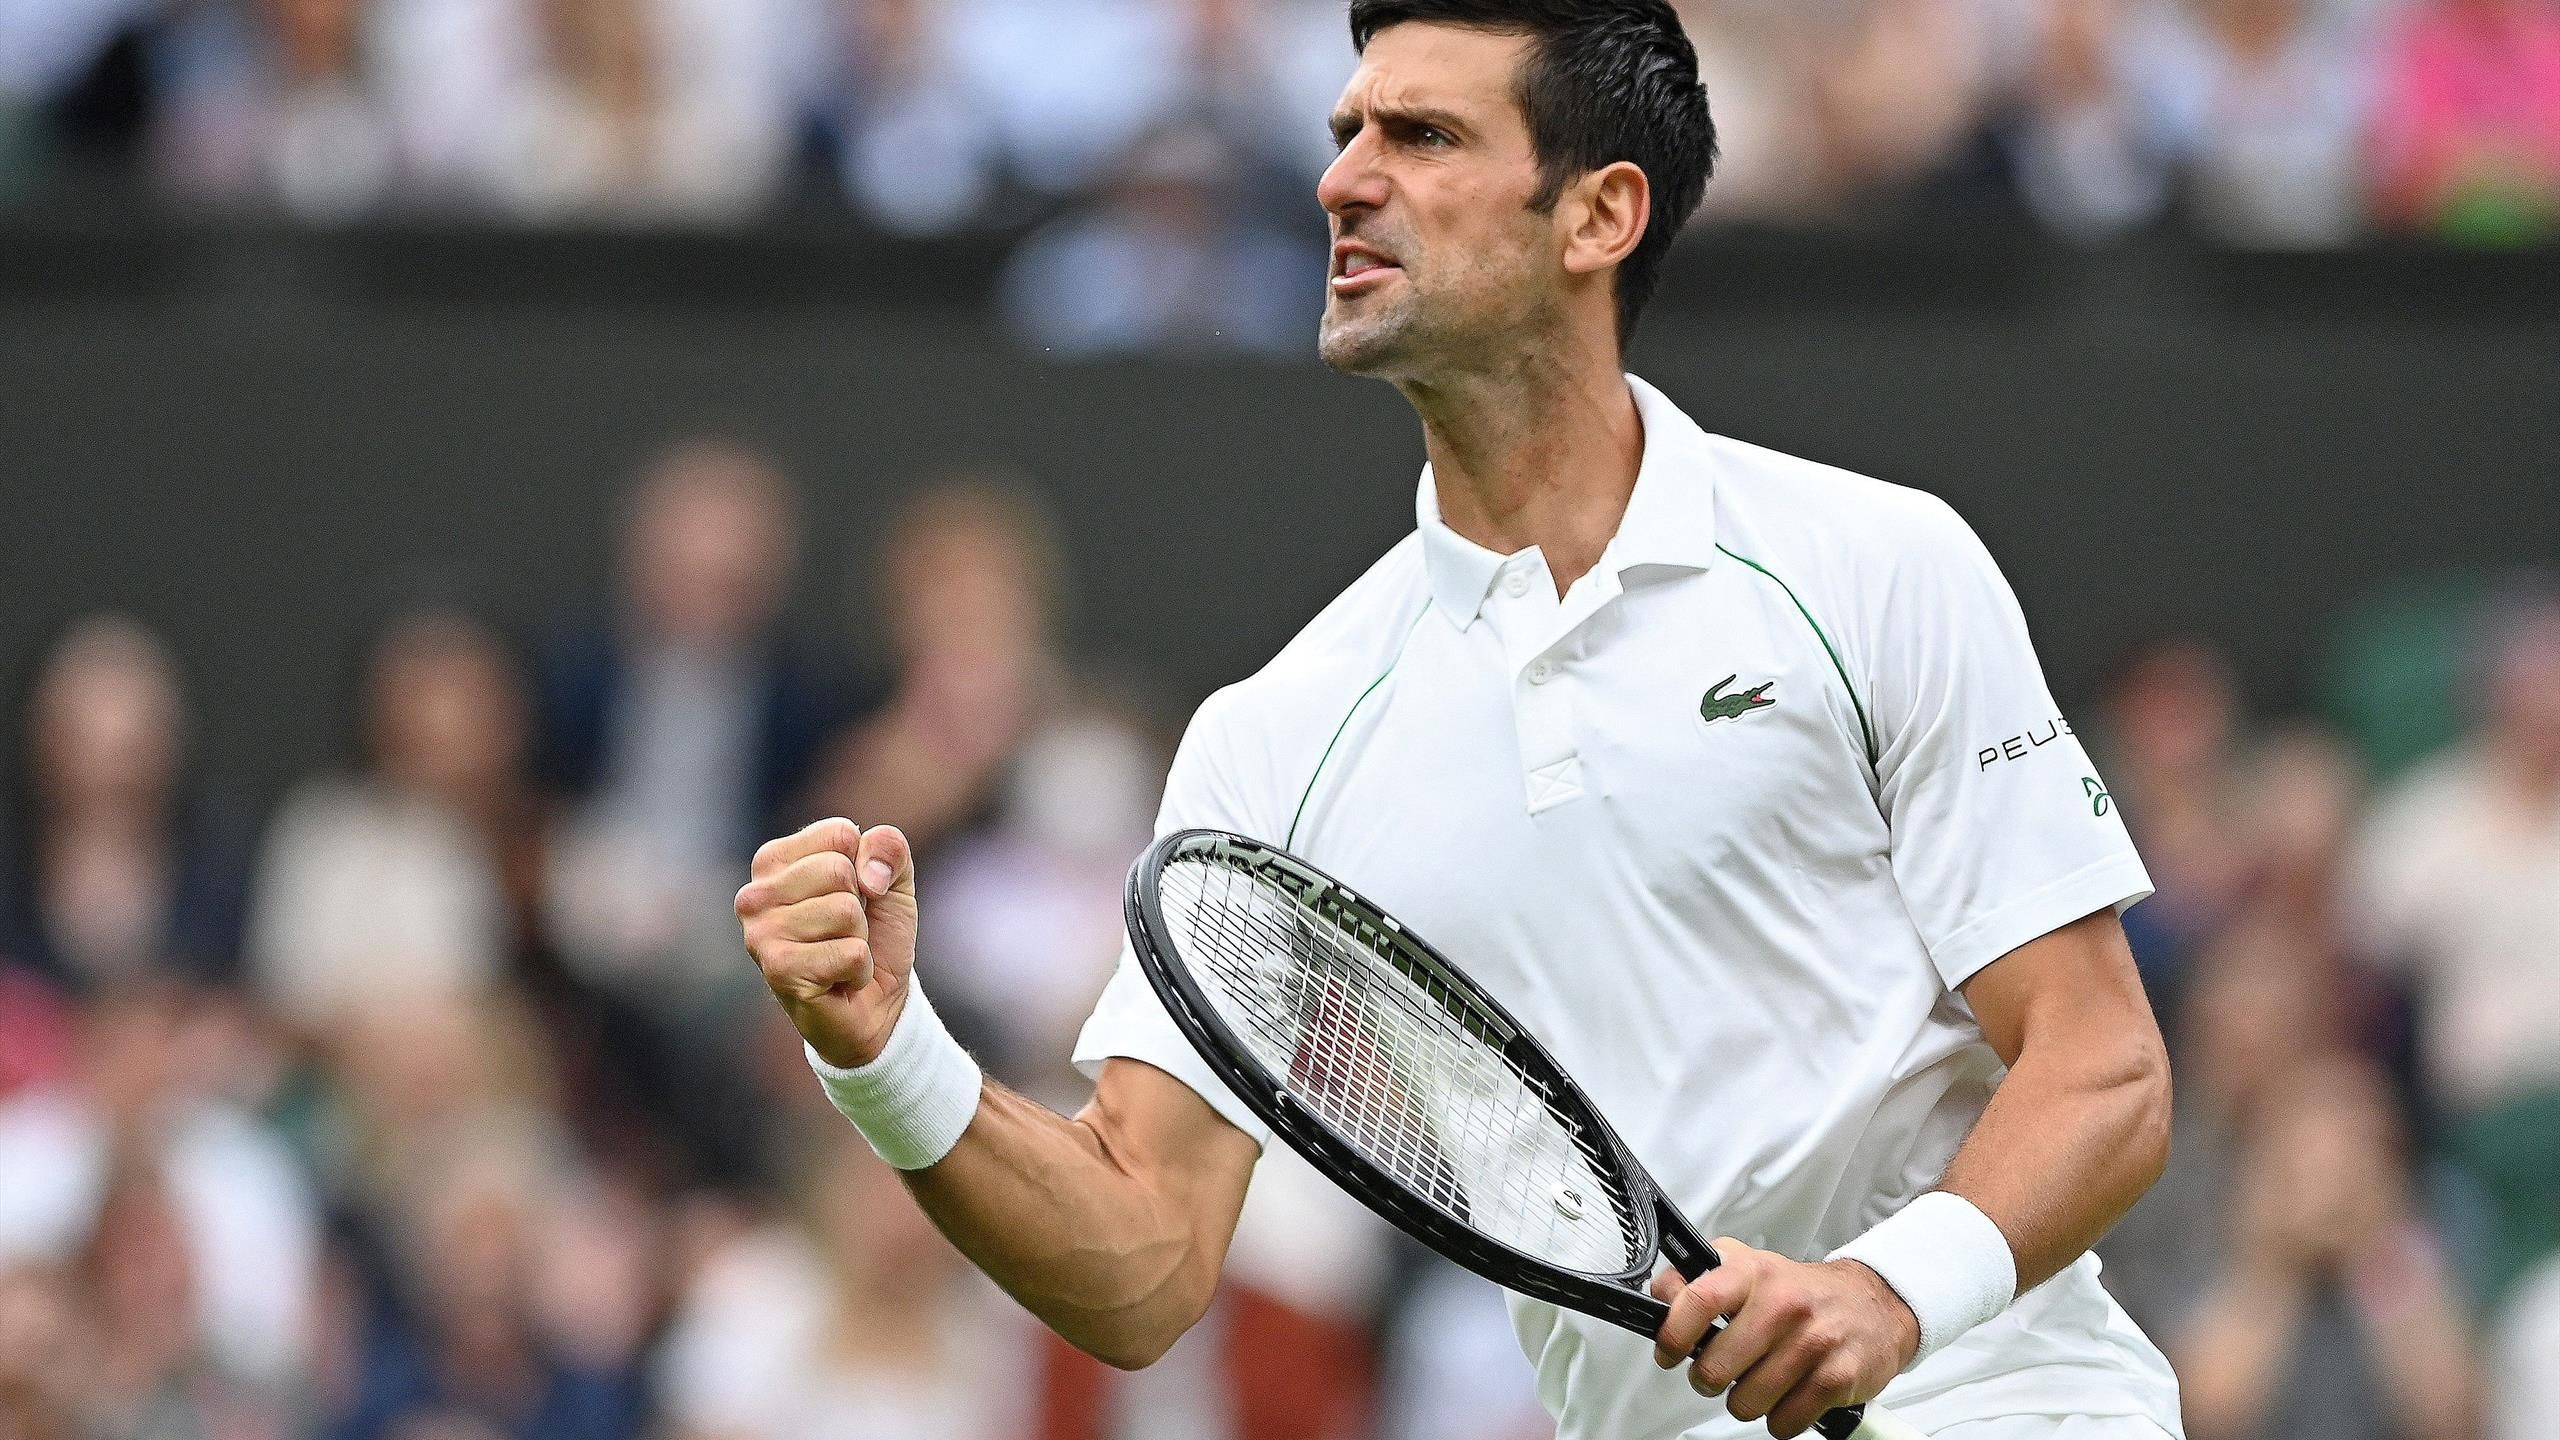 Wimbledon 2021 order of play day 3 Djokovic, Andy Murray, Venus Williams all in action